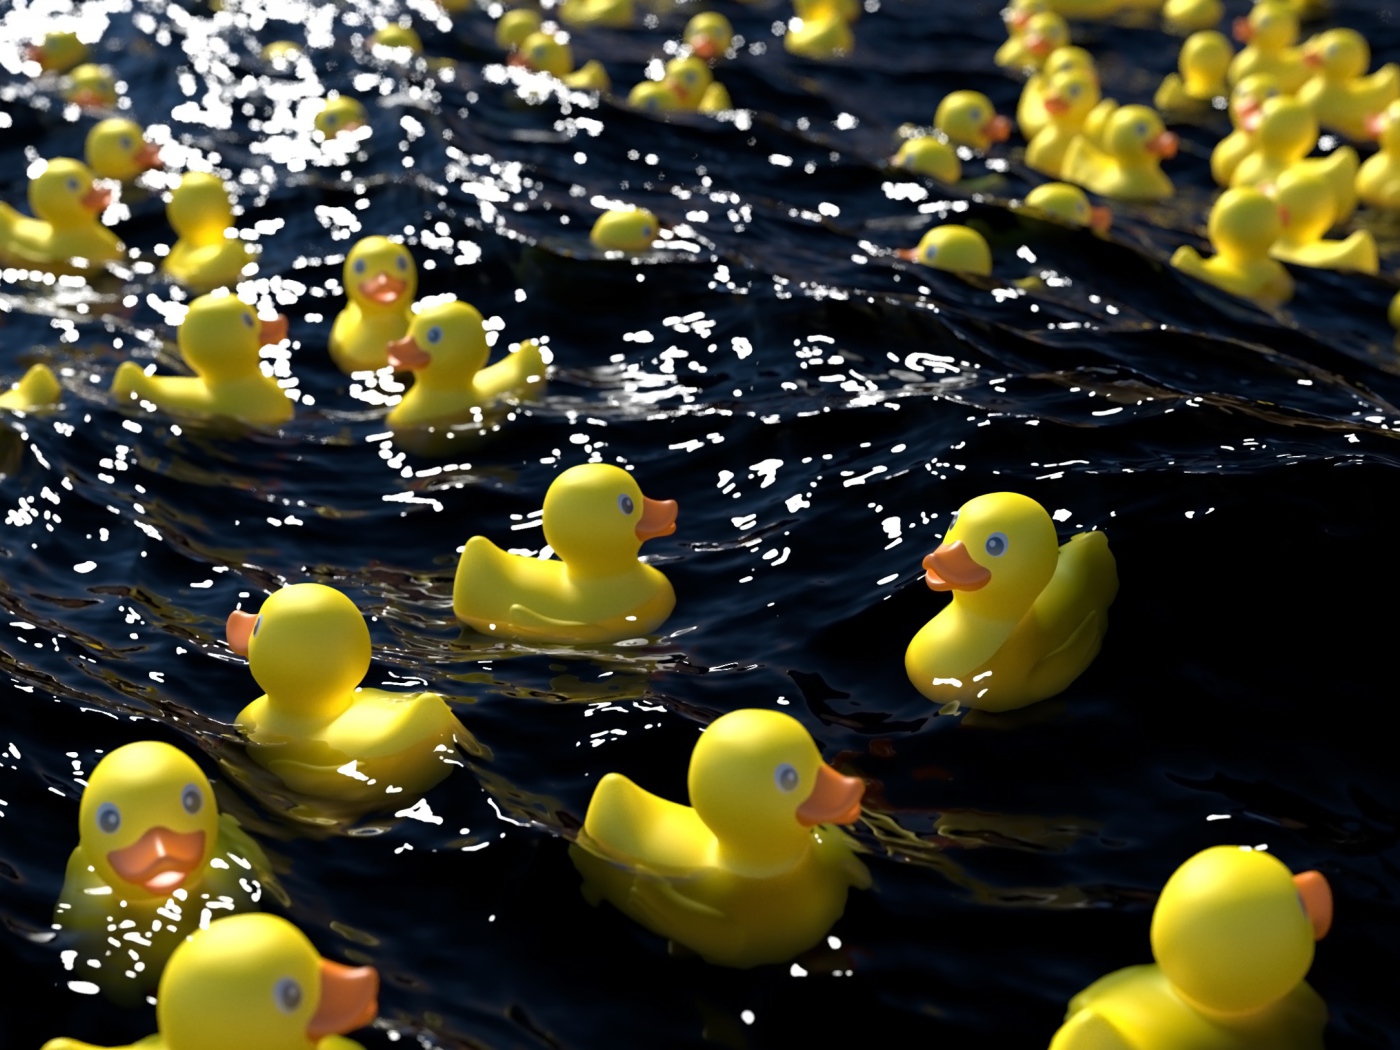 Many yellow rubber ducks in the water